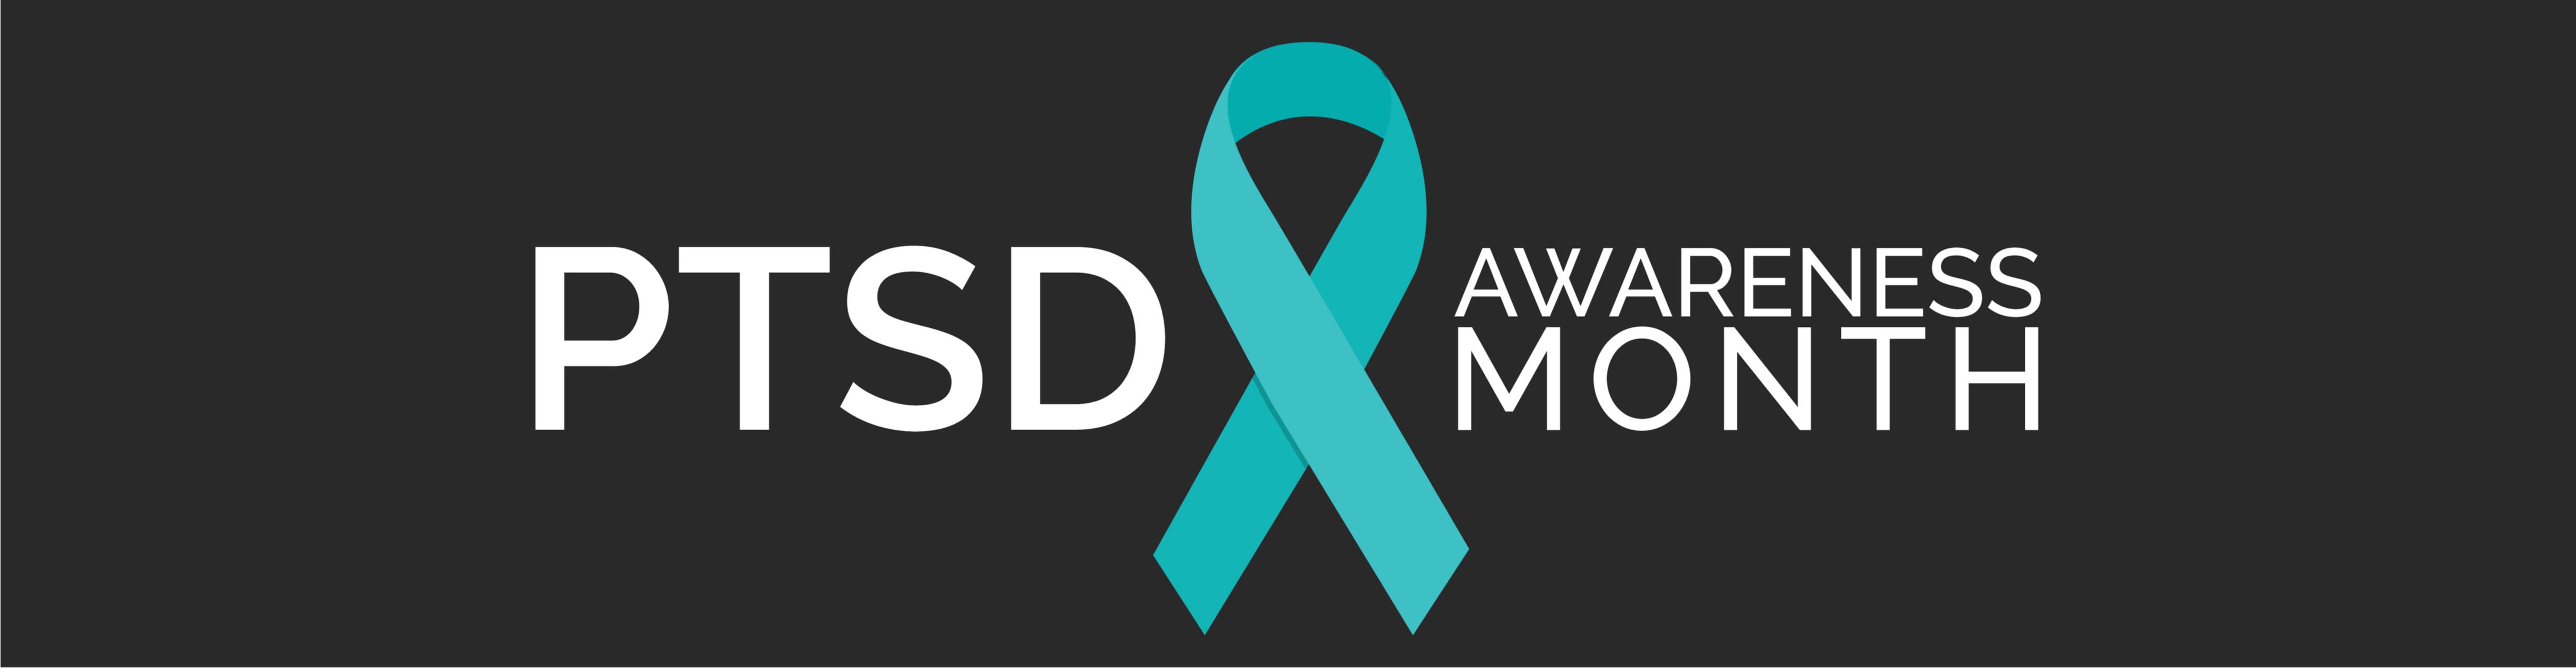 Image with the words PTSD Awareness Month